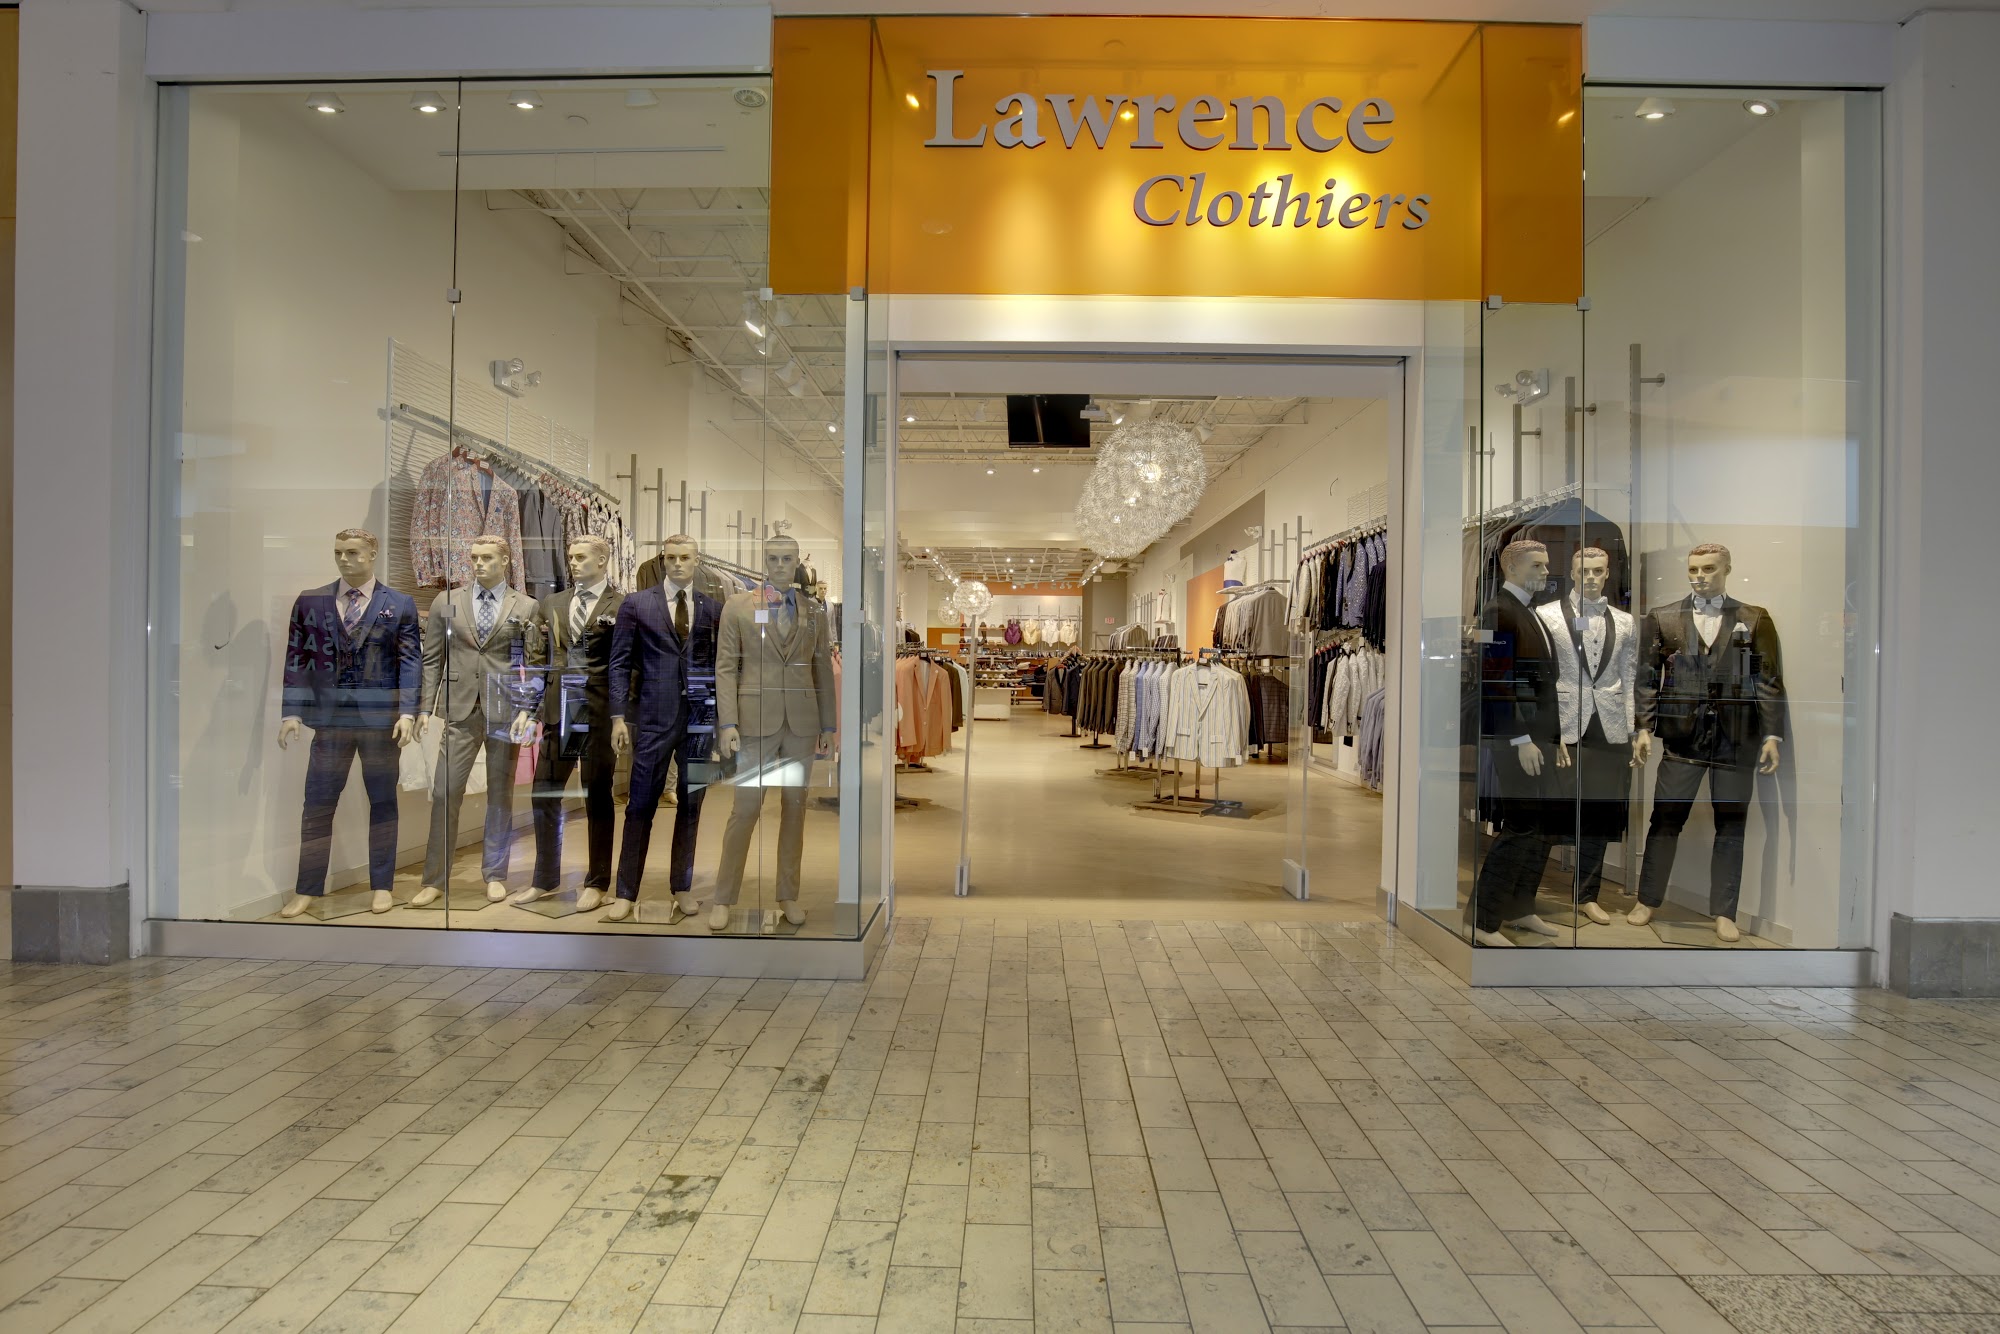 Lawrence Clothiers